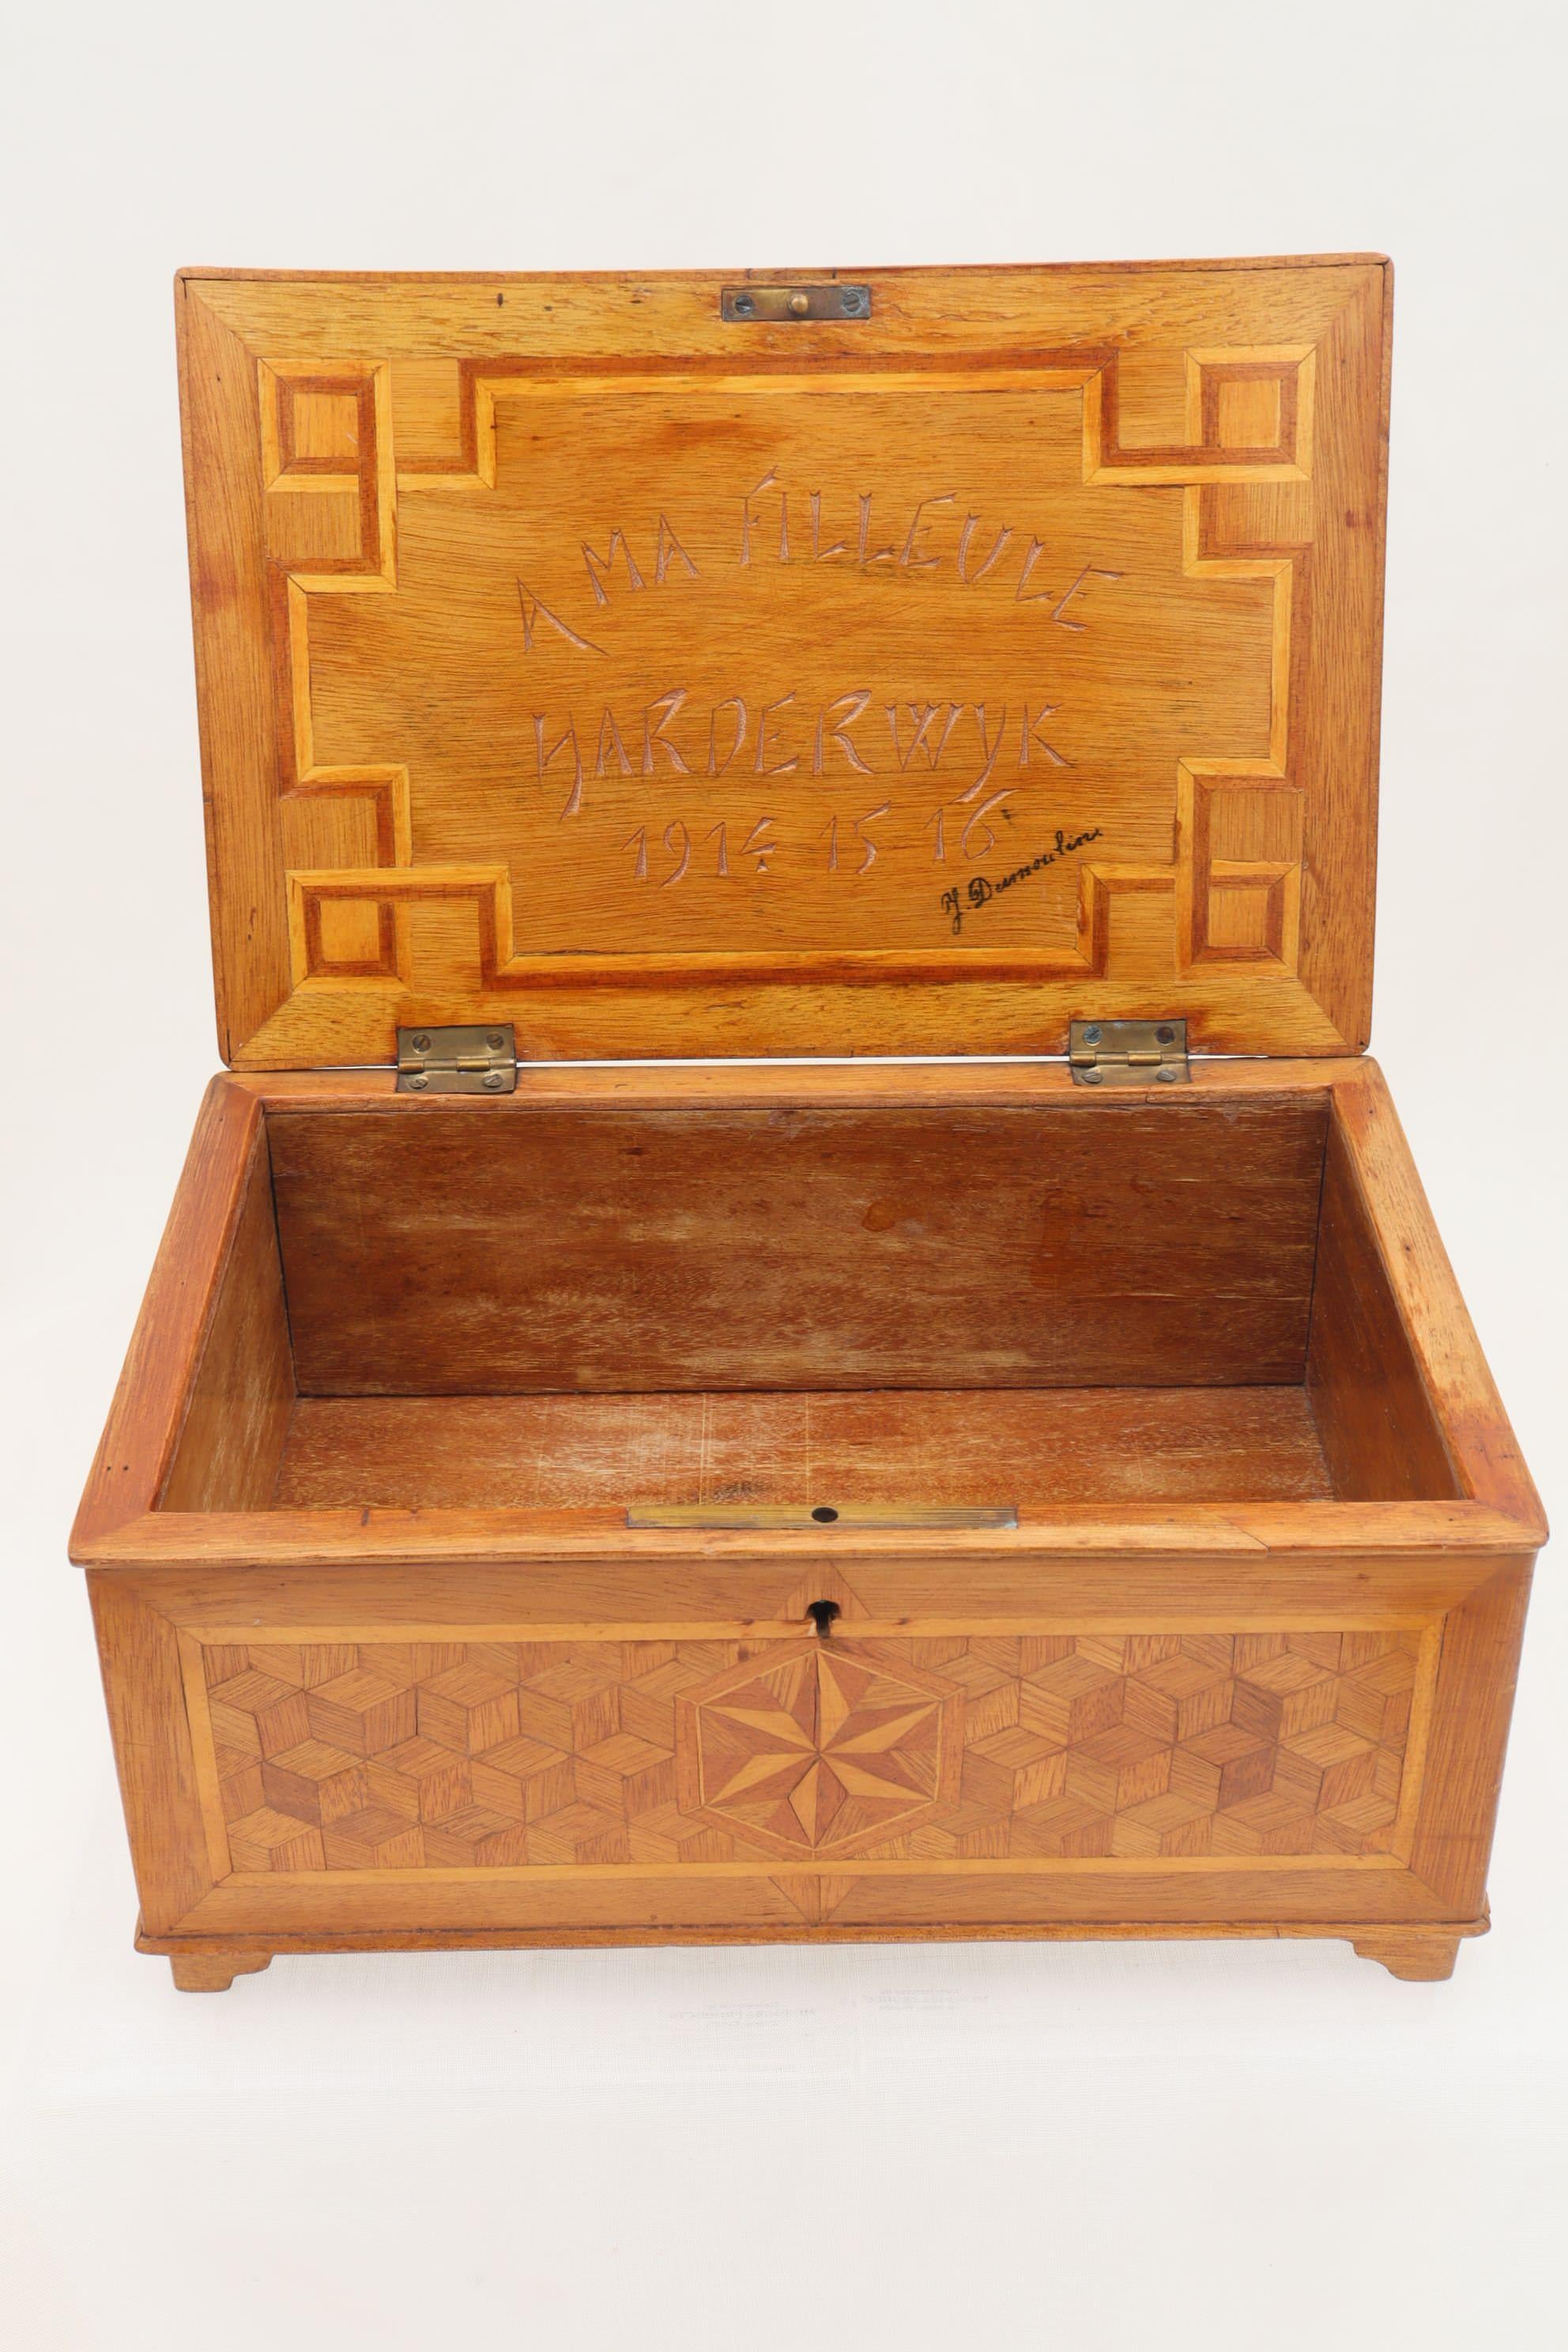 Dutch Inlaid box made in Harderwijk internment camp during WW1 For Sale